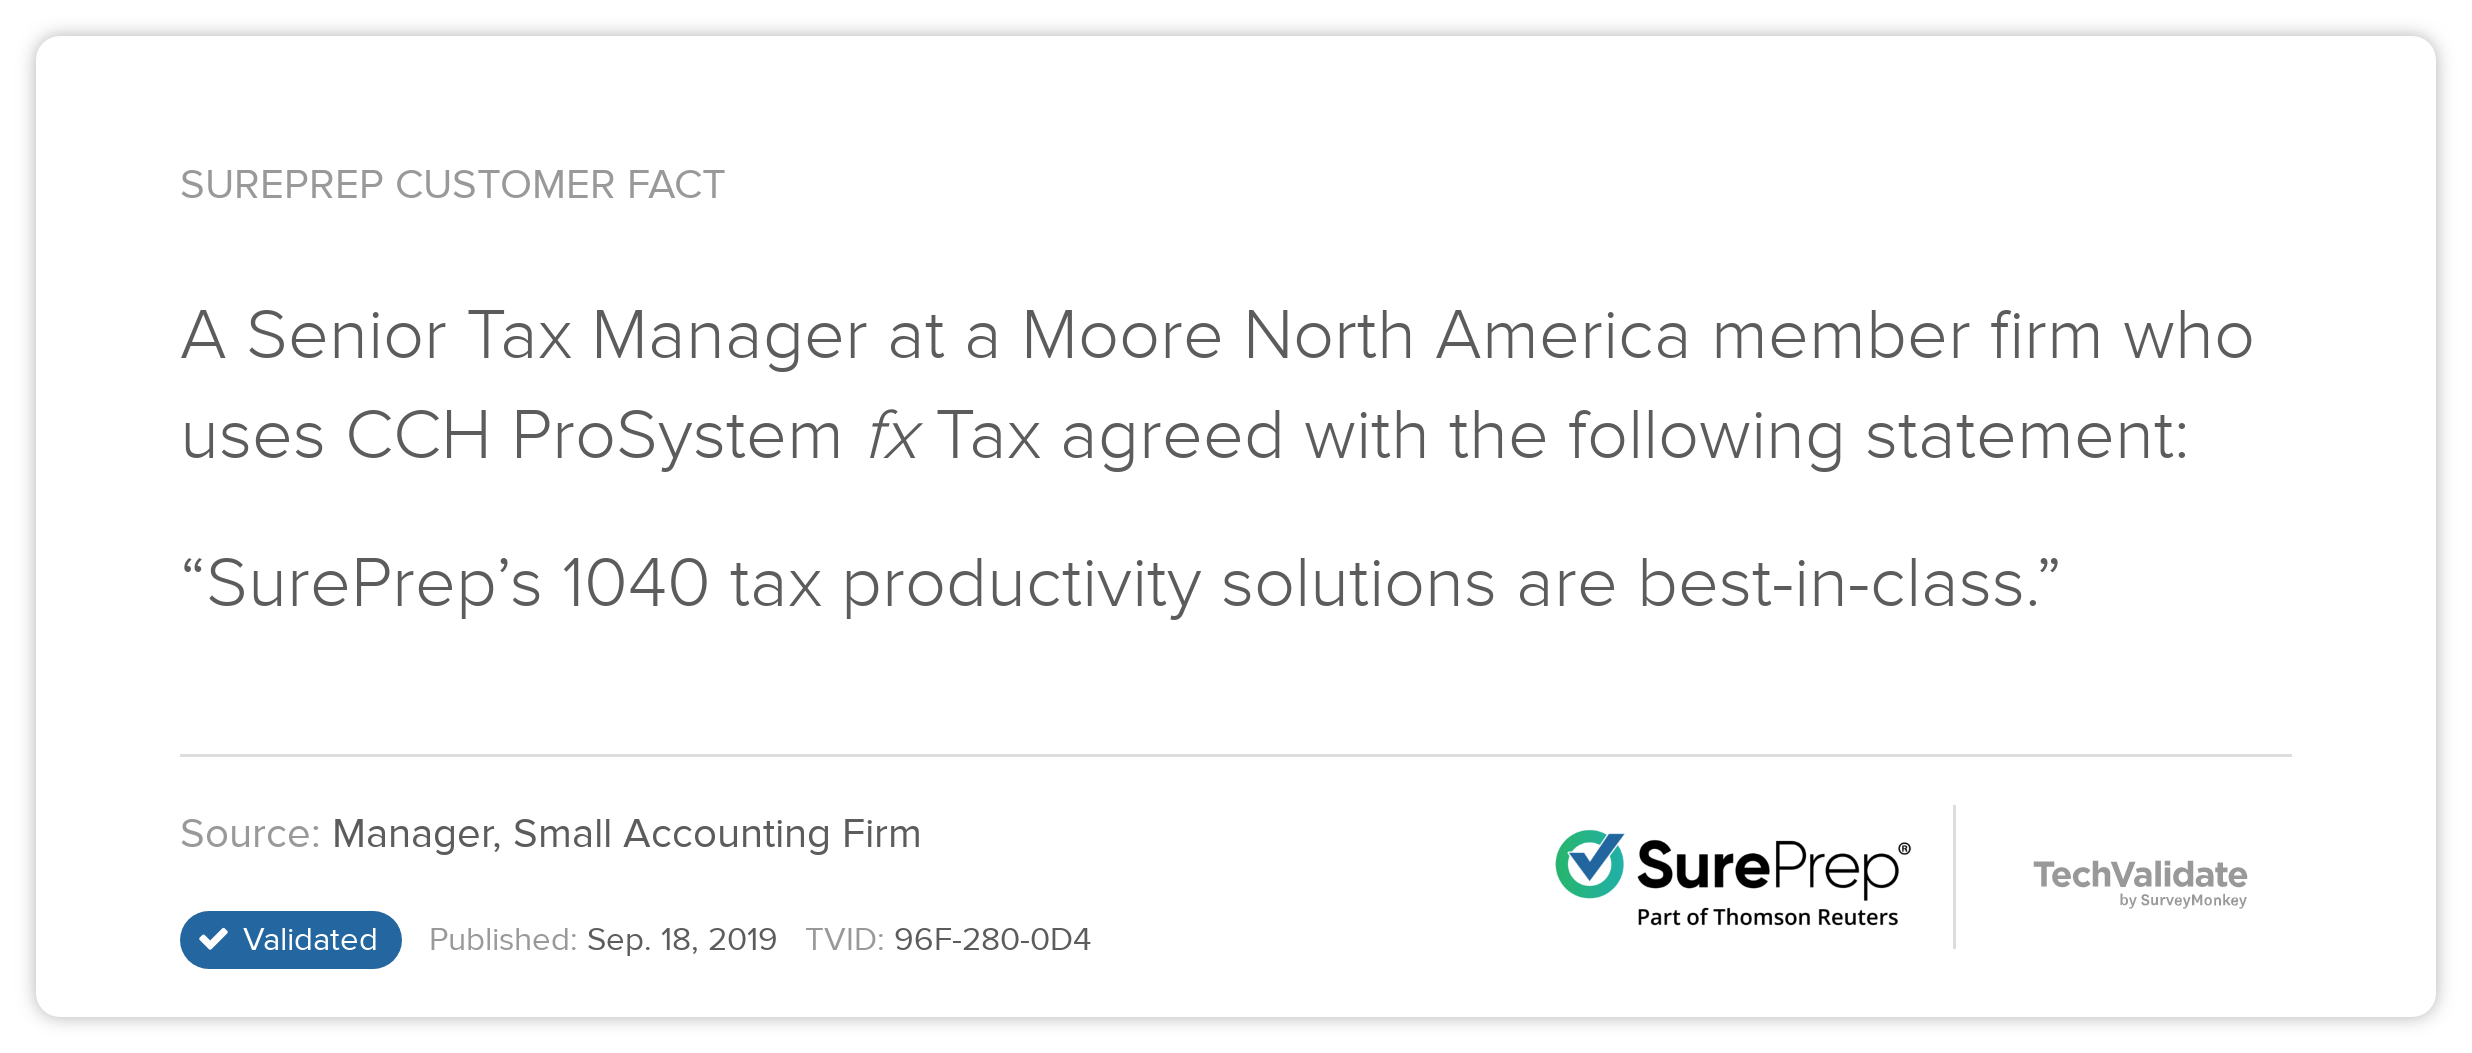 A Senior Tax Manager at a Moore Stephens North America member firm who uses CCH ProSystem fx Tax agreed with the following statement: "SurePrep's 1040 tax productivity solutions are best-in-class." 